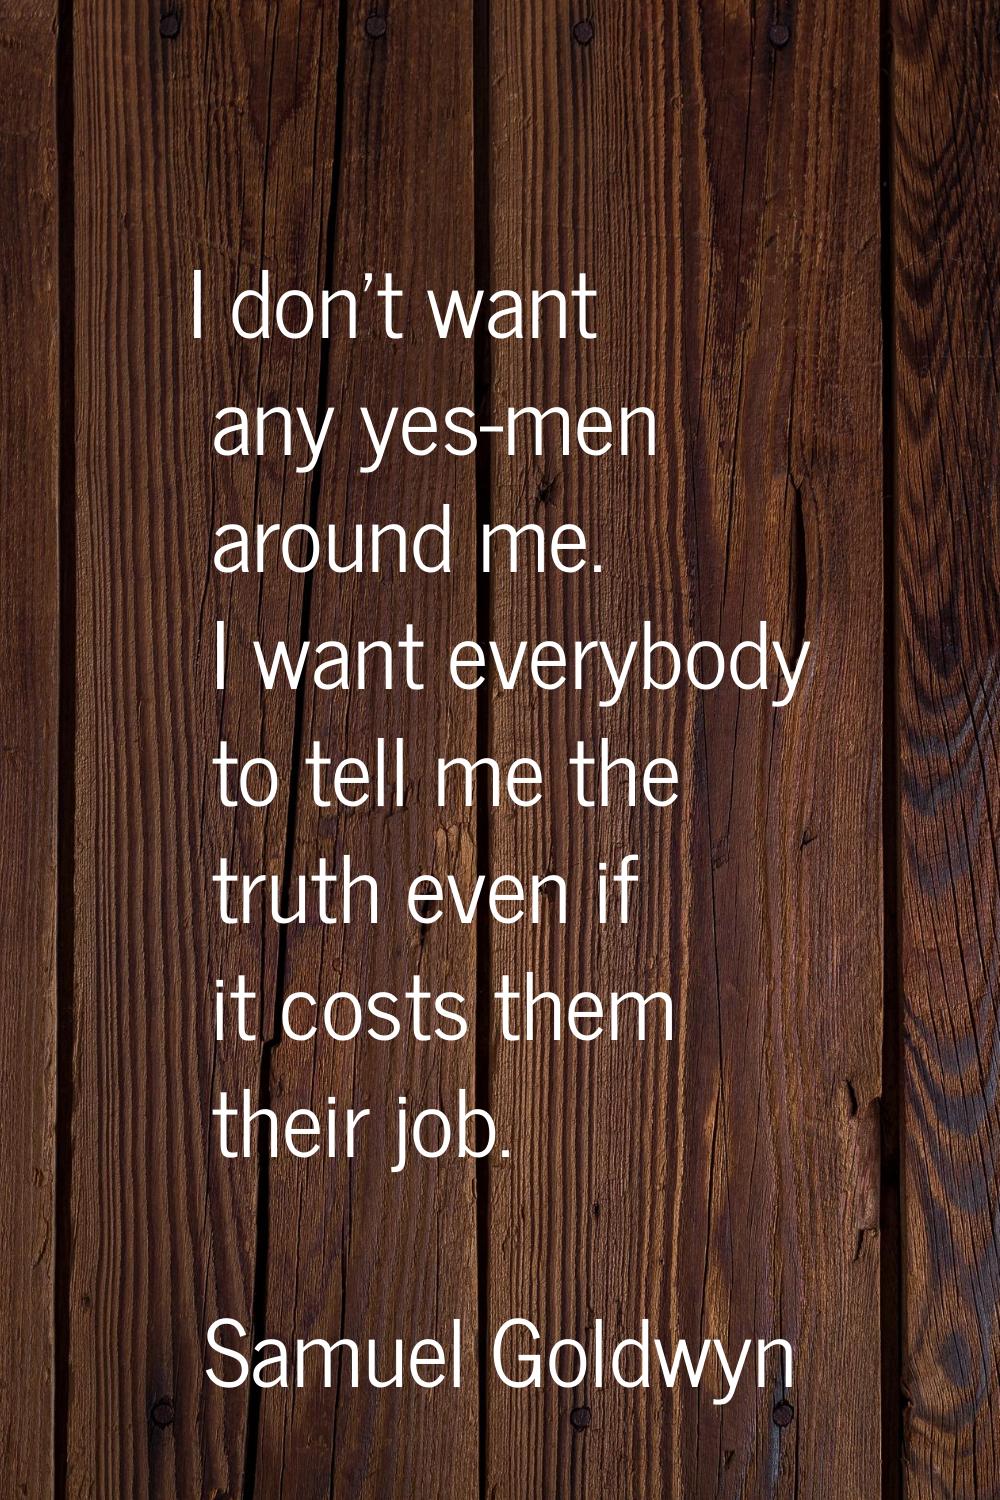 I don't want any yes-men around me. I want everybody to tell me the truth even if it costs them the